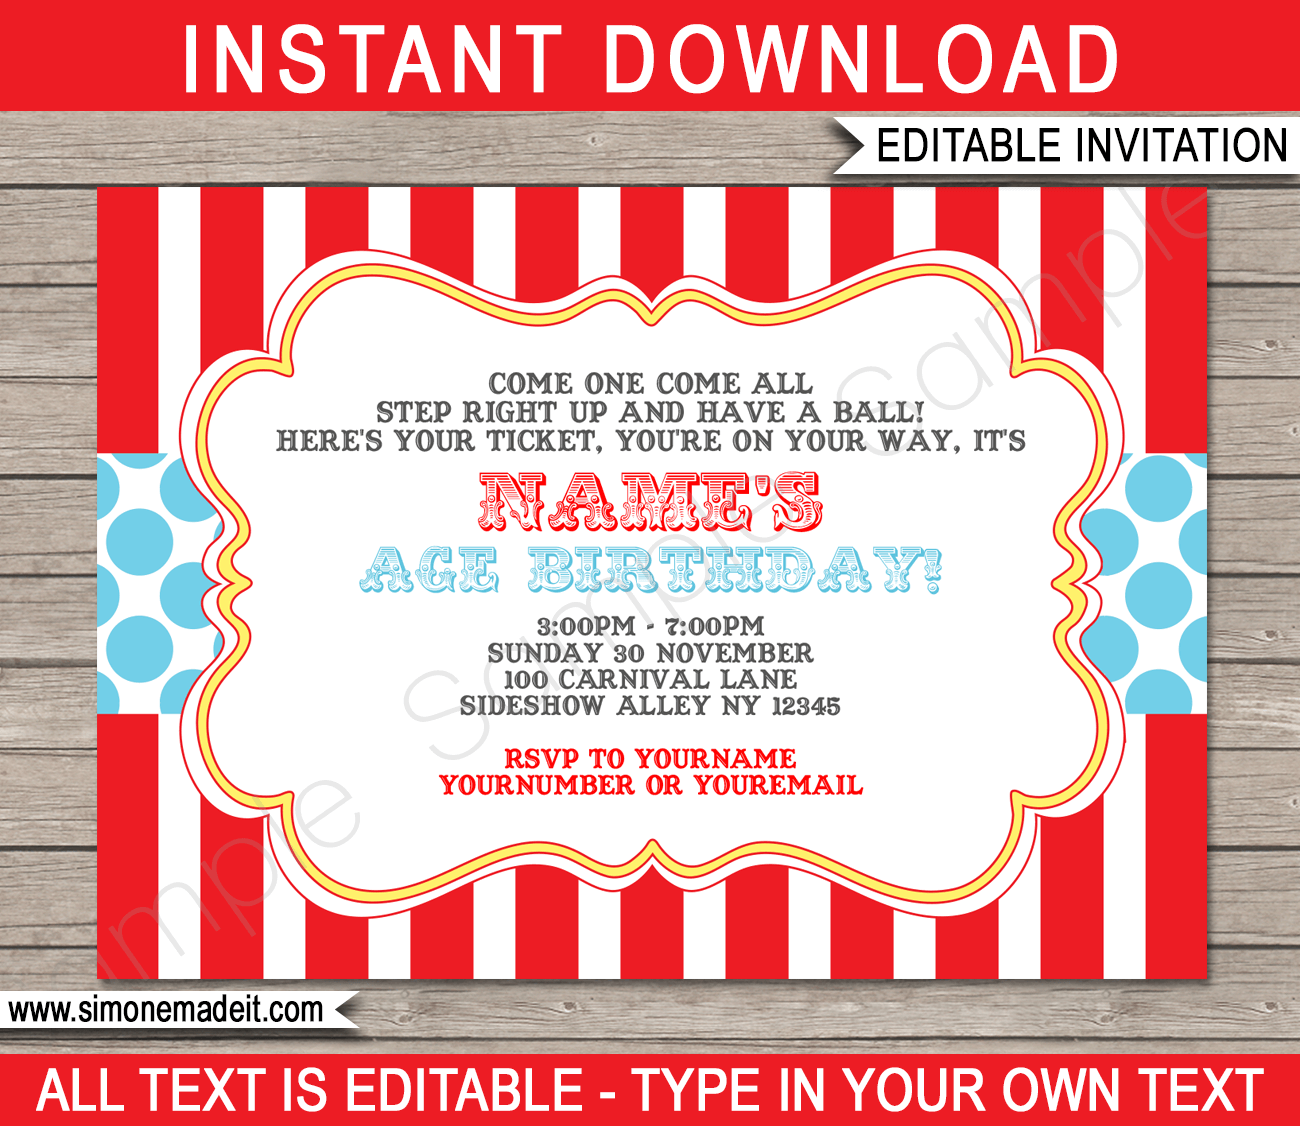 Circus Invitation Template | Red Aqua | Party Invitations | Carnival Party | Birthday Party | Editable DIY Theme Template | INSTANT DOWNLOAD $7.50 via SIMONEmadeit.com